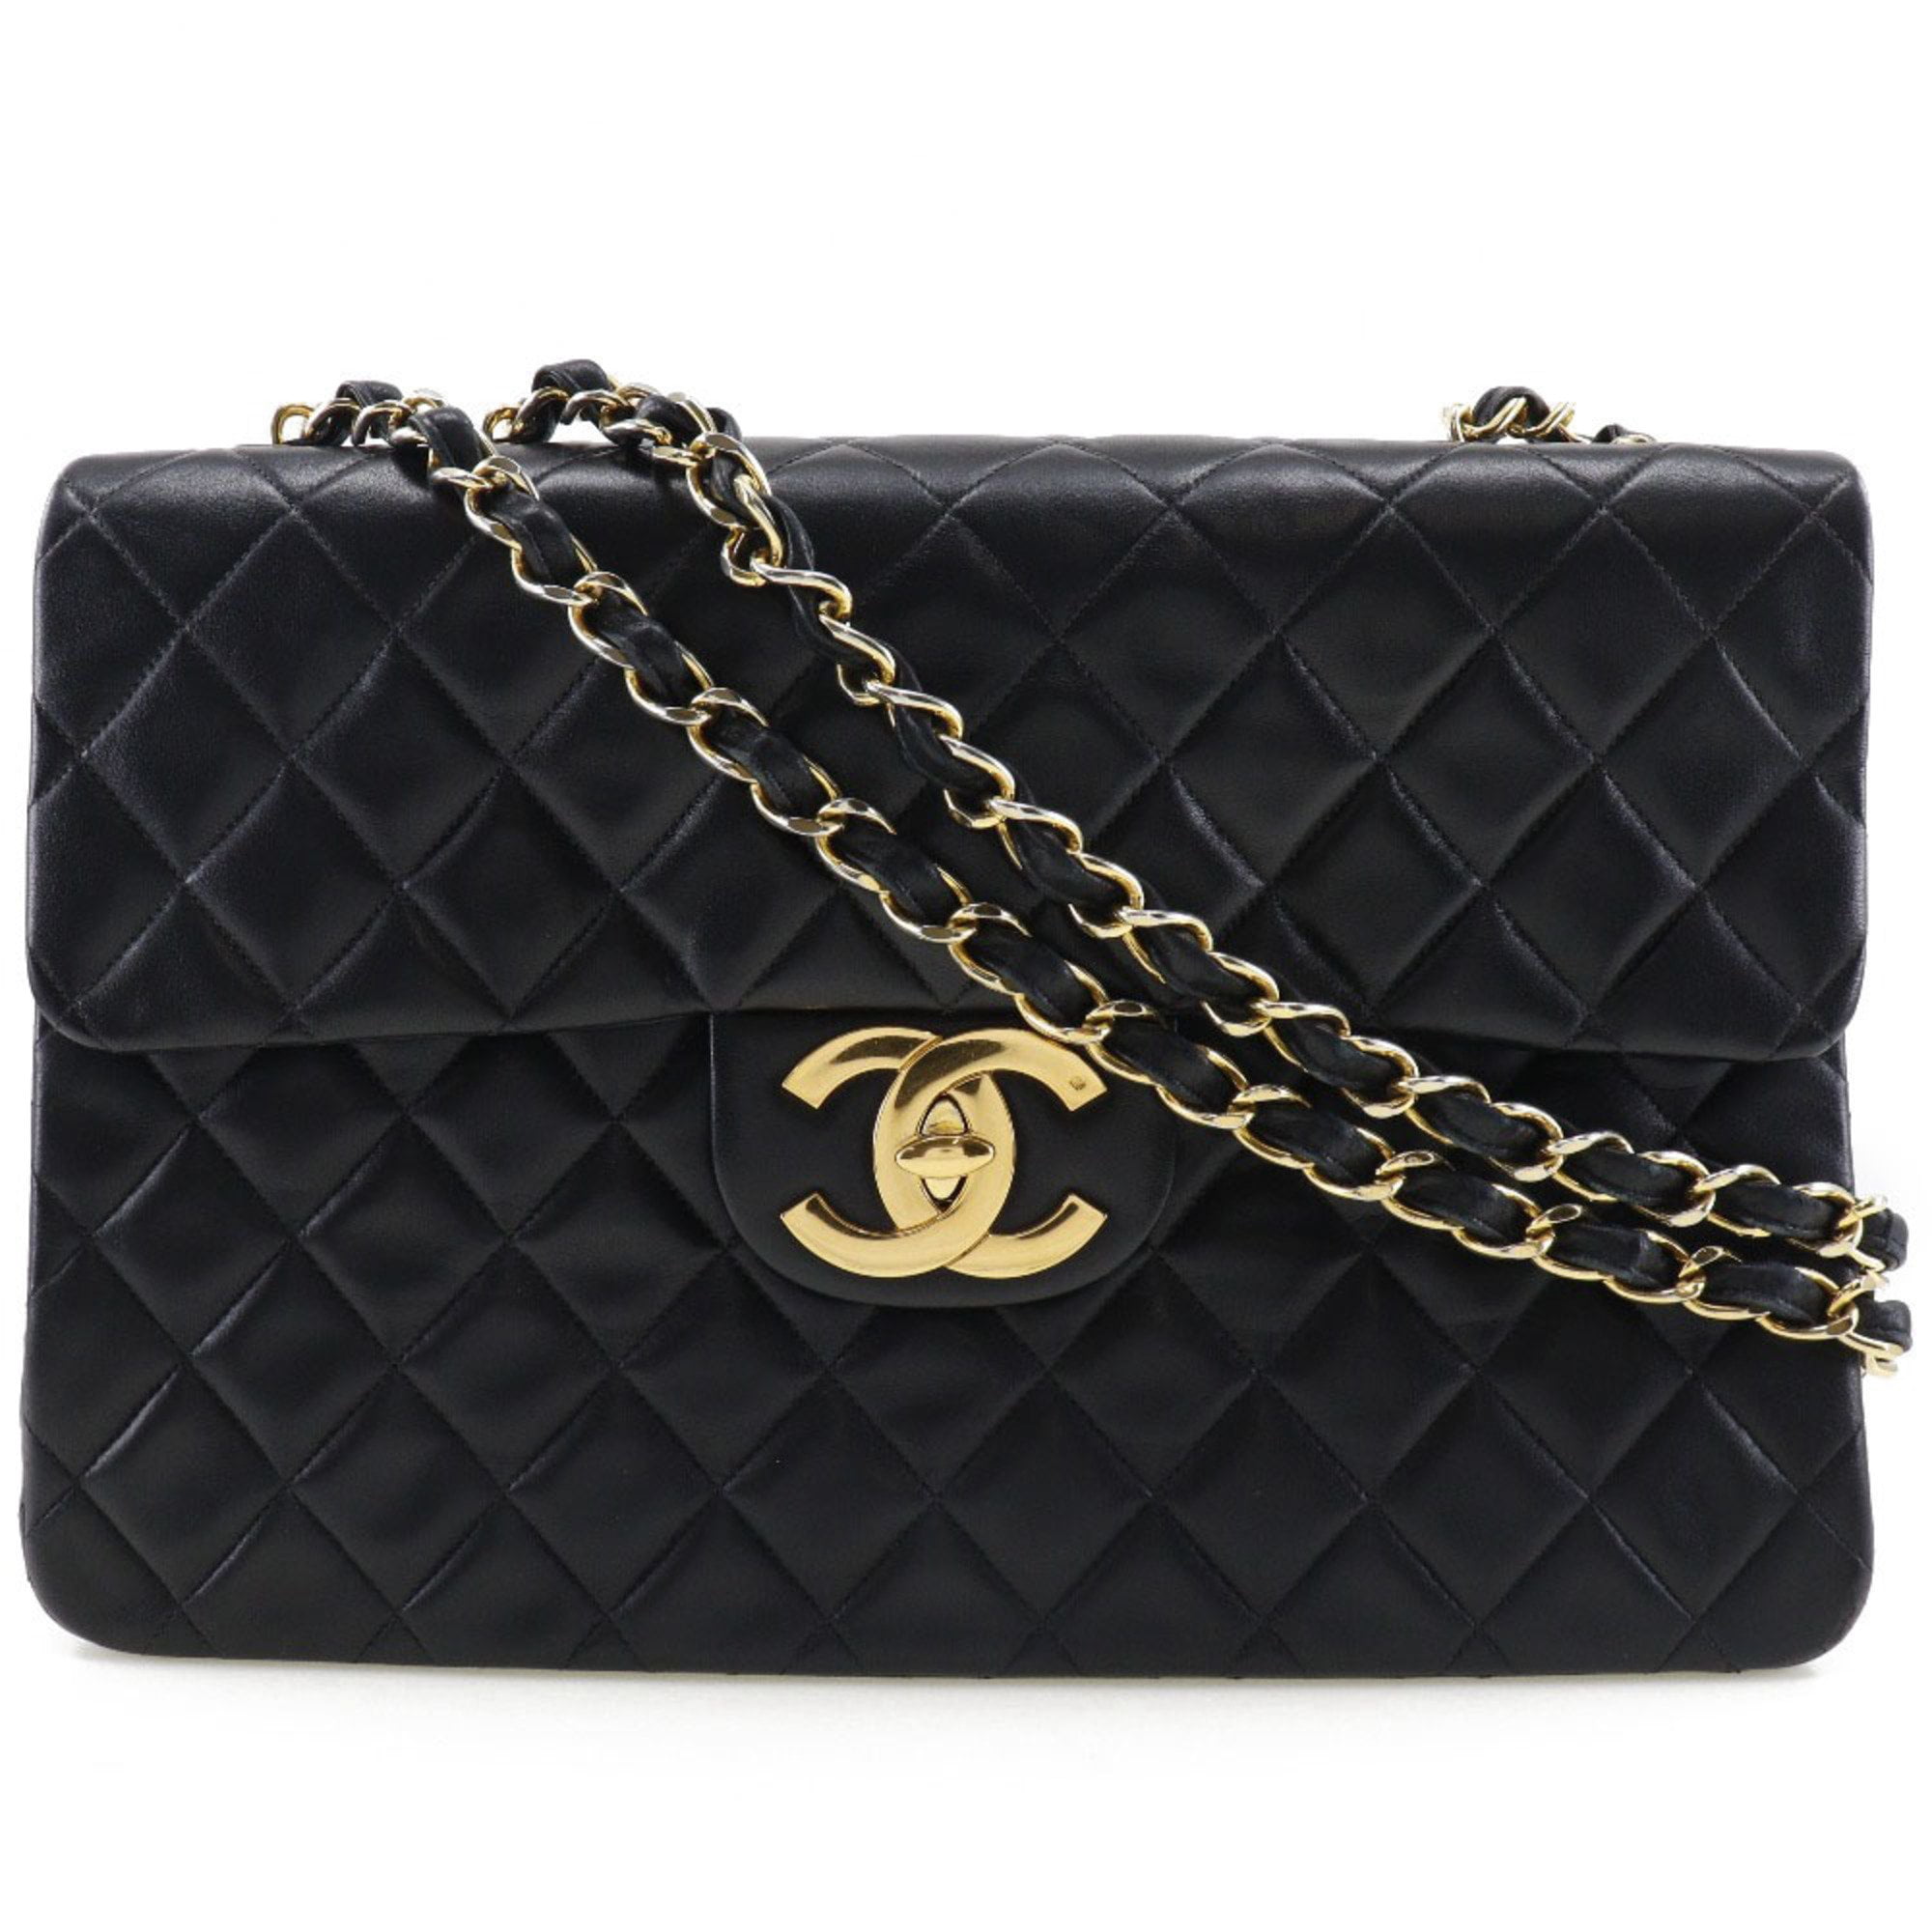 New CHANEL 23A BLACK Vanity Case Clutch Gold Chain PEARLS Evening  Minaudiere Bag | eBay